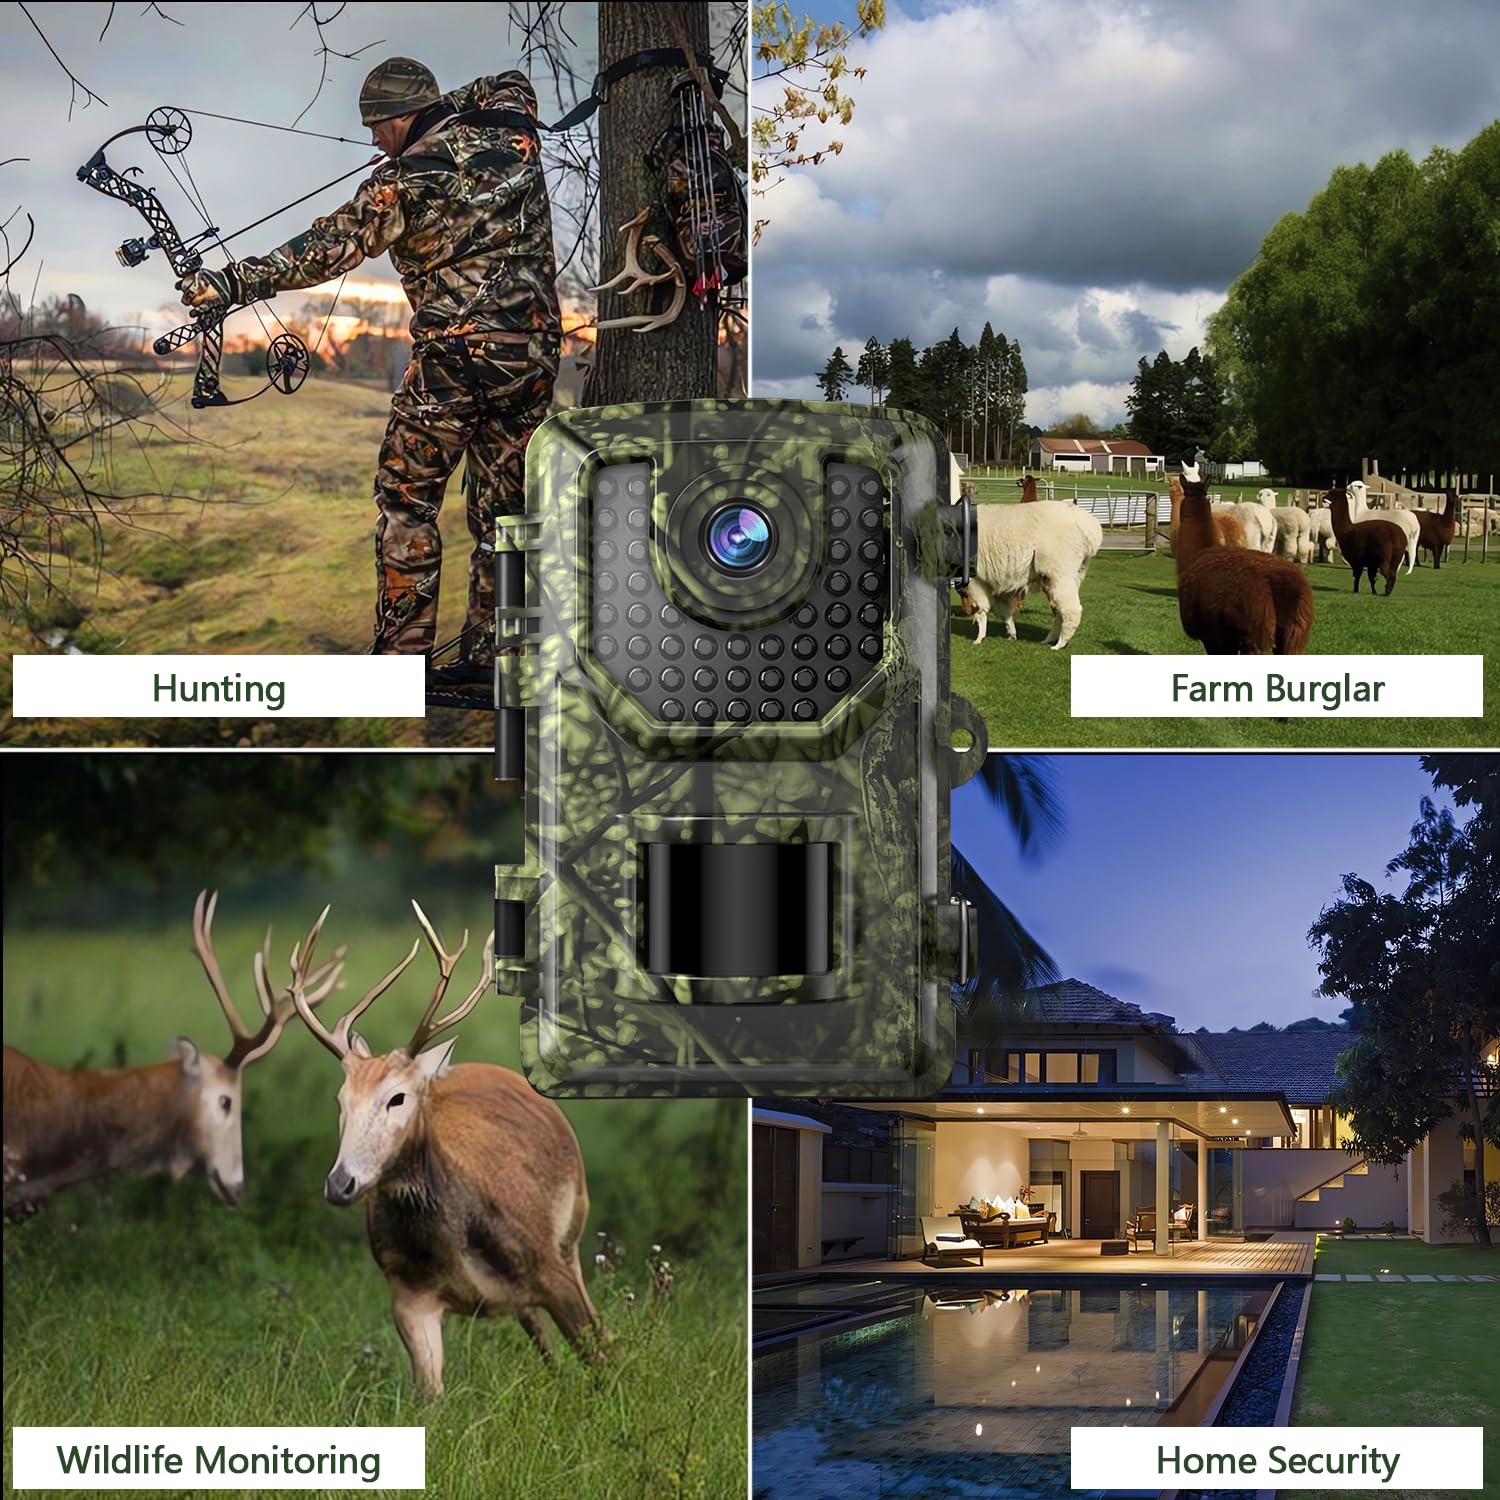 Digitgarden Wildlife Camera 32MP 1296P Full HD Trail Camera with Night Vision Motion Activation 0.2s Trigger Time 42pcs No Glow Infrared LED IP66 Waterproof 2.4''LCD Hunting Camera